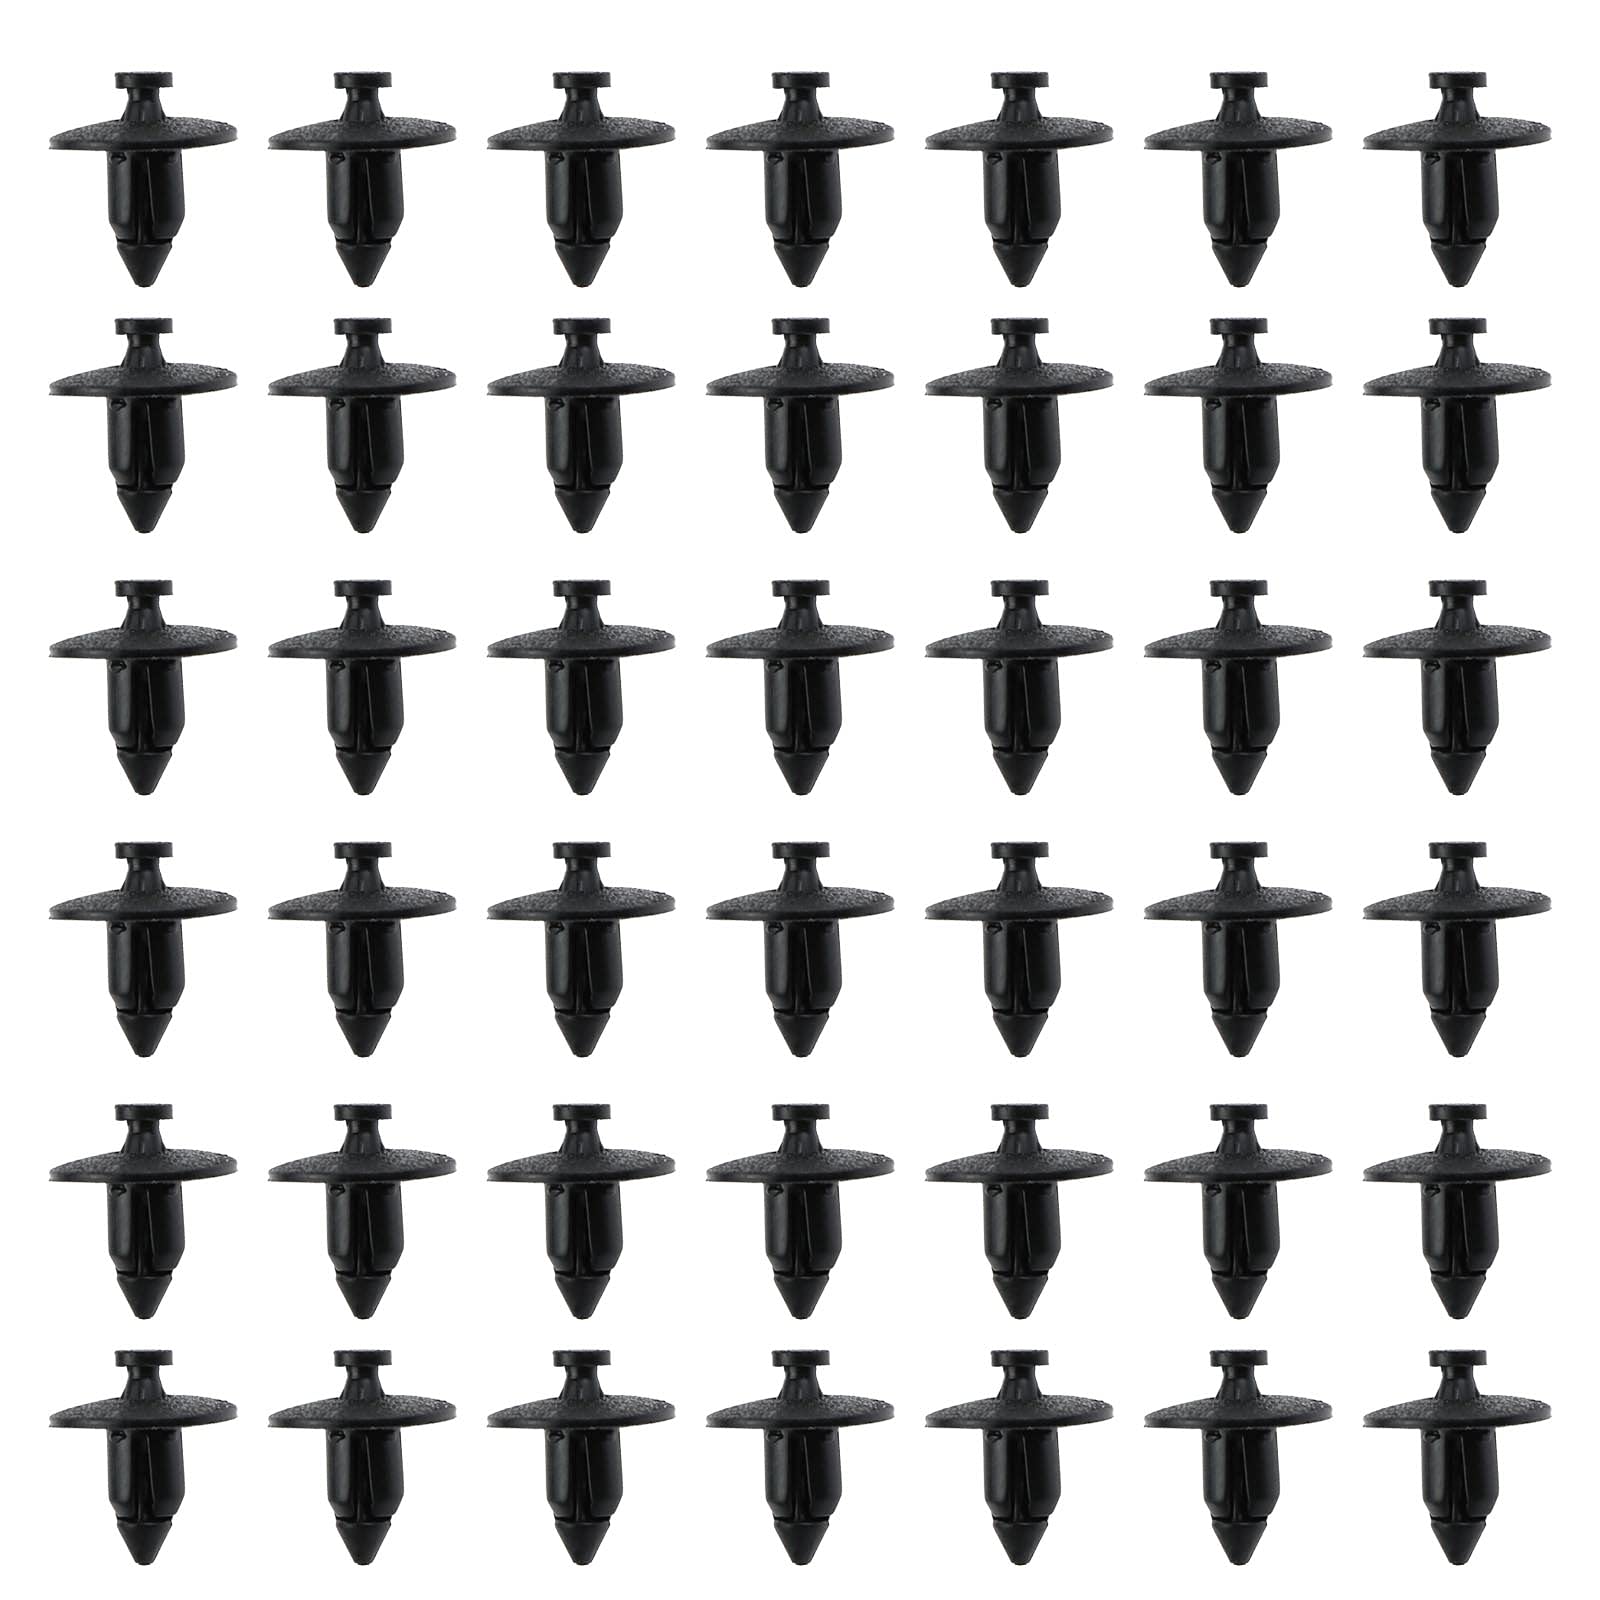 Be In Your Mind 50pcs Plastic Rivet Fastener Clips 3541113 for Trim Panels Bumper Fascias Lining 8mm Hole Compatible with Volvo S40 S60 S80 V50 V70 von Be In Your Mind